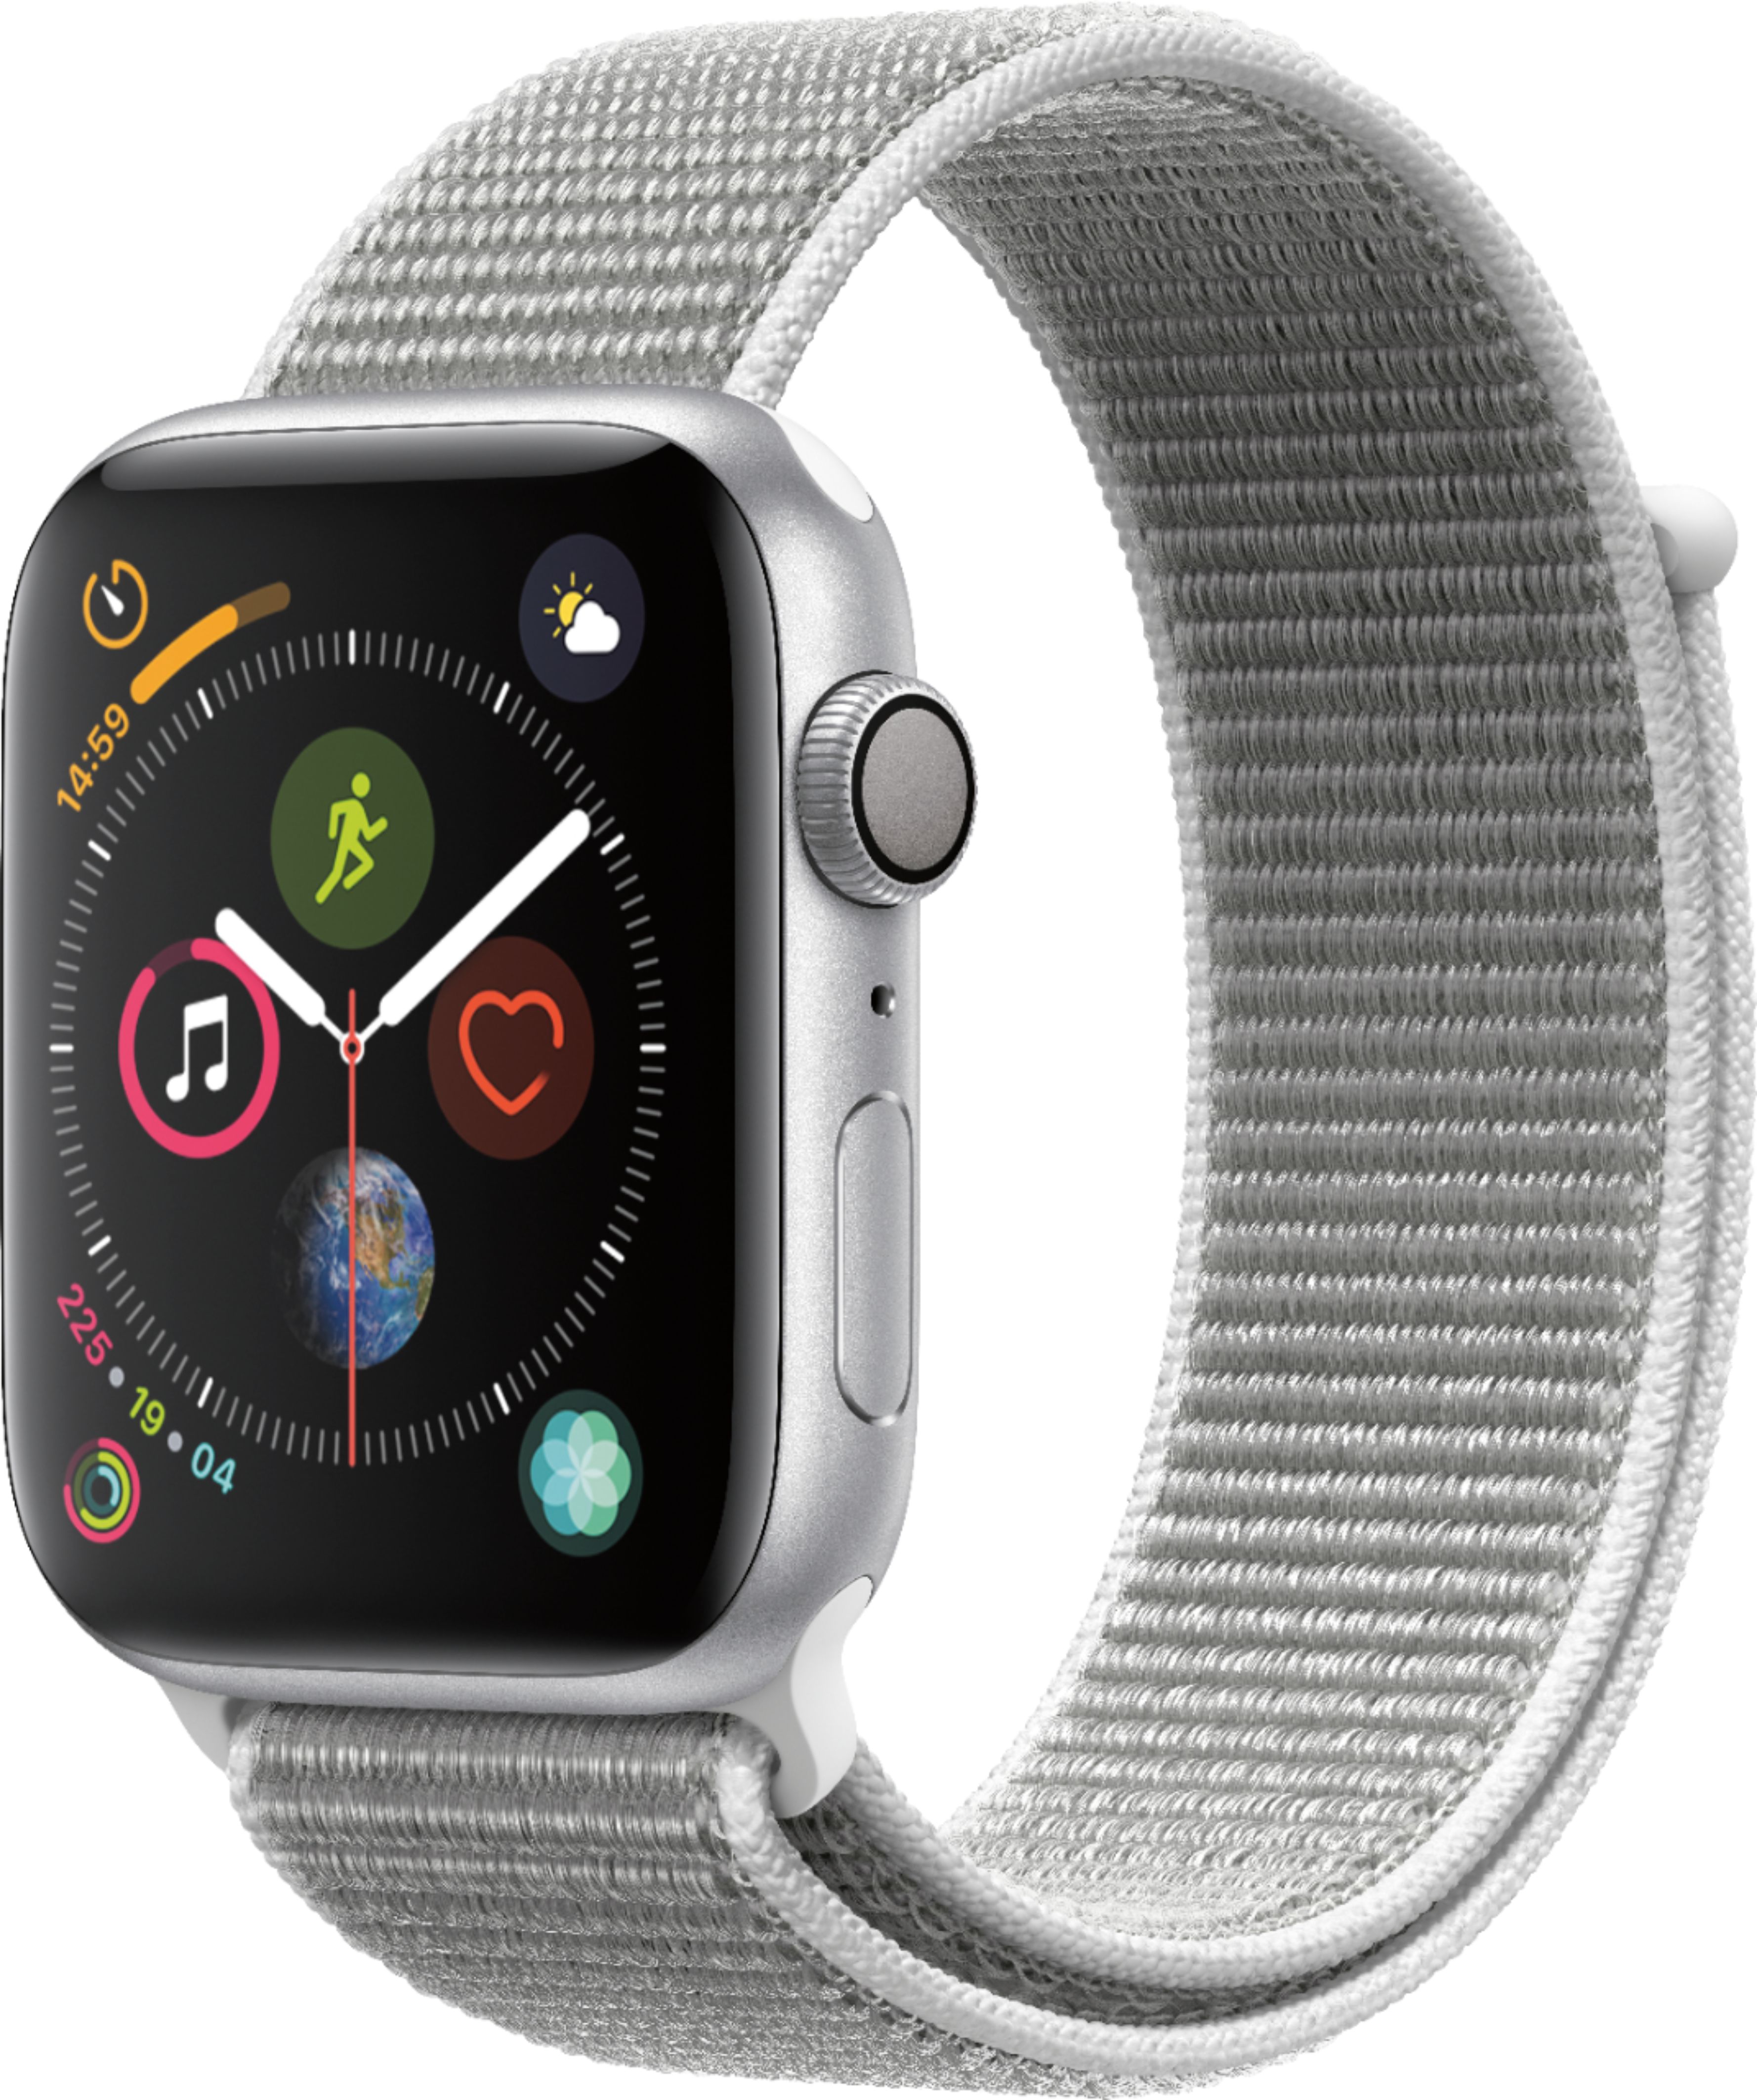 Apple Watch Series 4 (GPS) 44mm Silver Aluminum Case with Seashell Sport Loop - Silver Aluminum